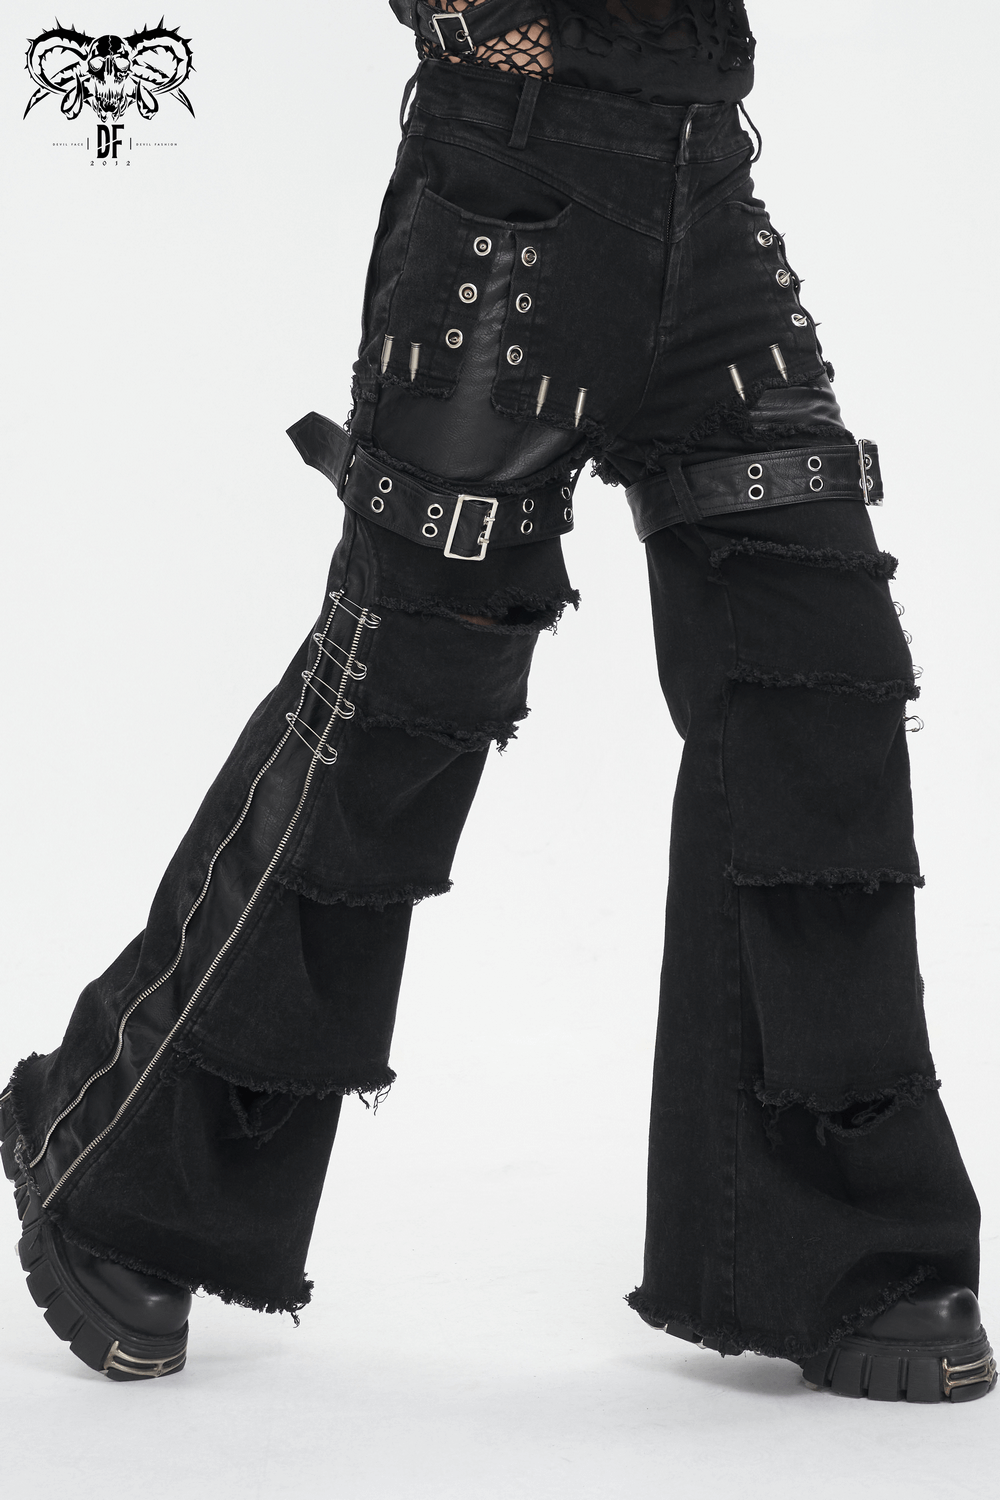 Gothic Buckle and Chain Flared Jeans for Edgy Style